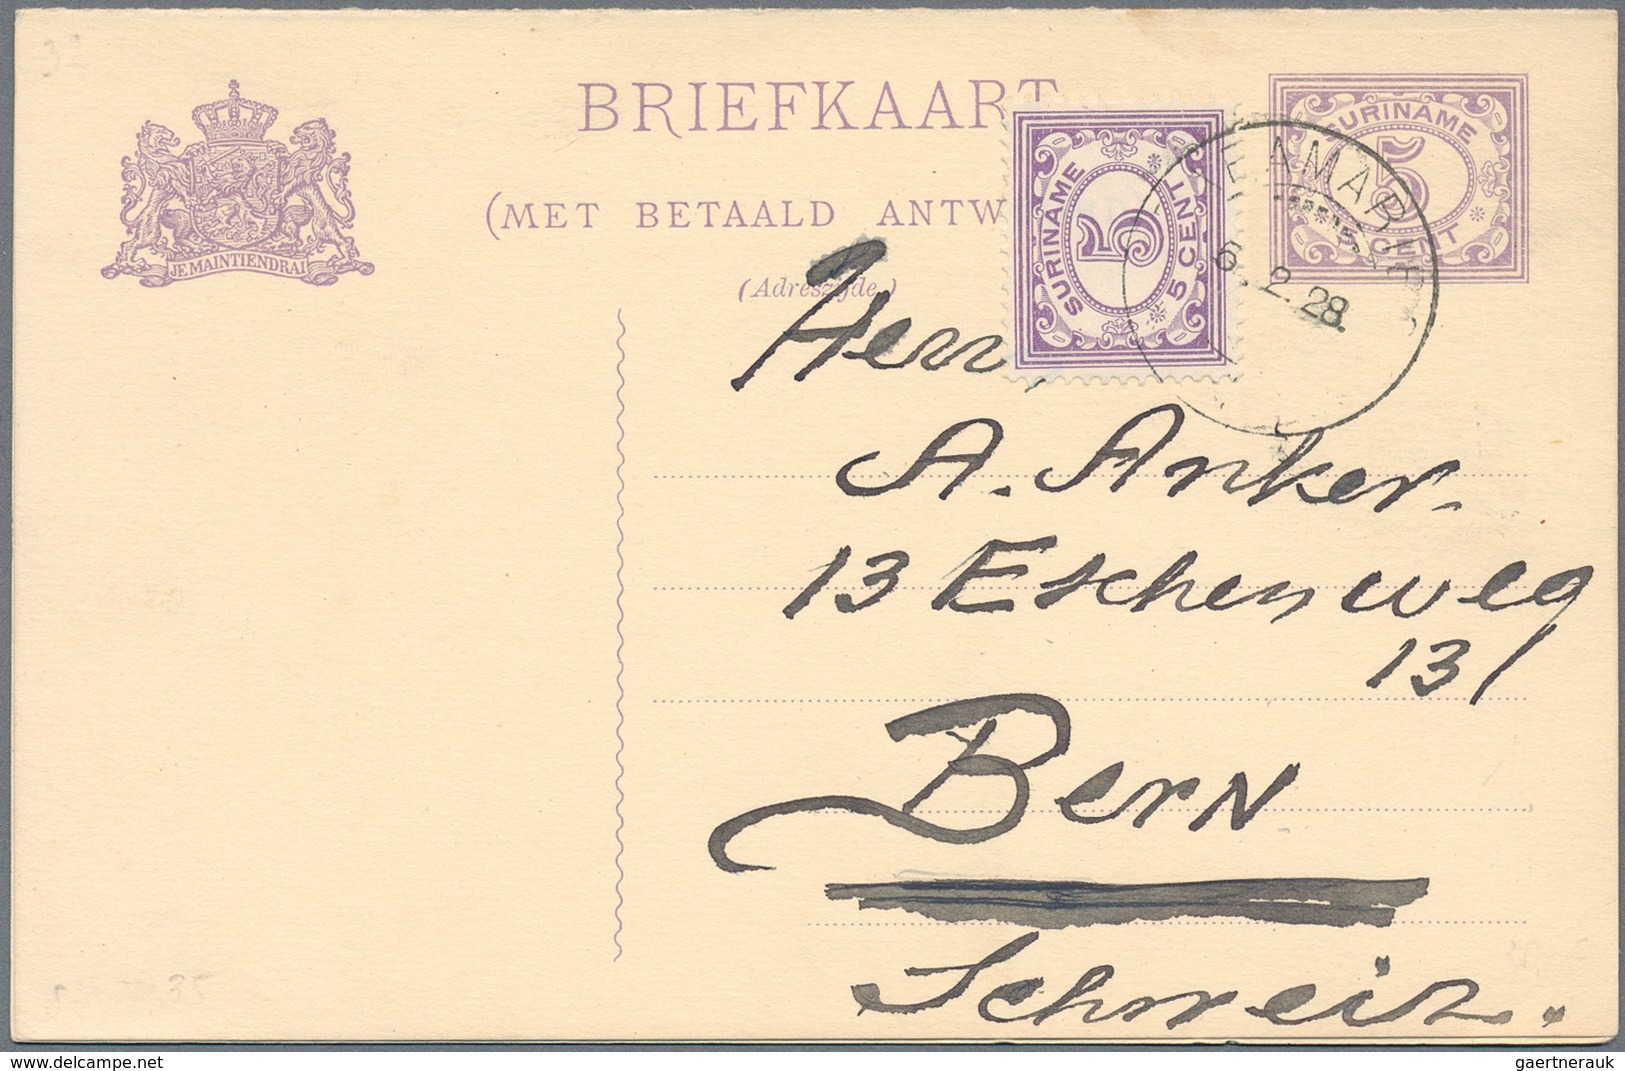 Curacao: 1884/1942, covers (5), used ppc (2) and used stationery (11 inc. uprates) inc. registration